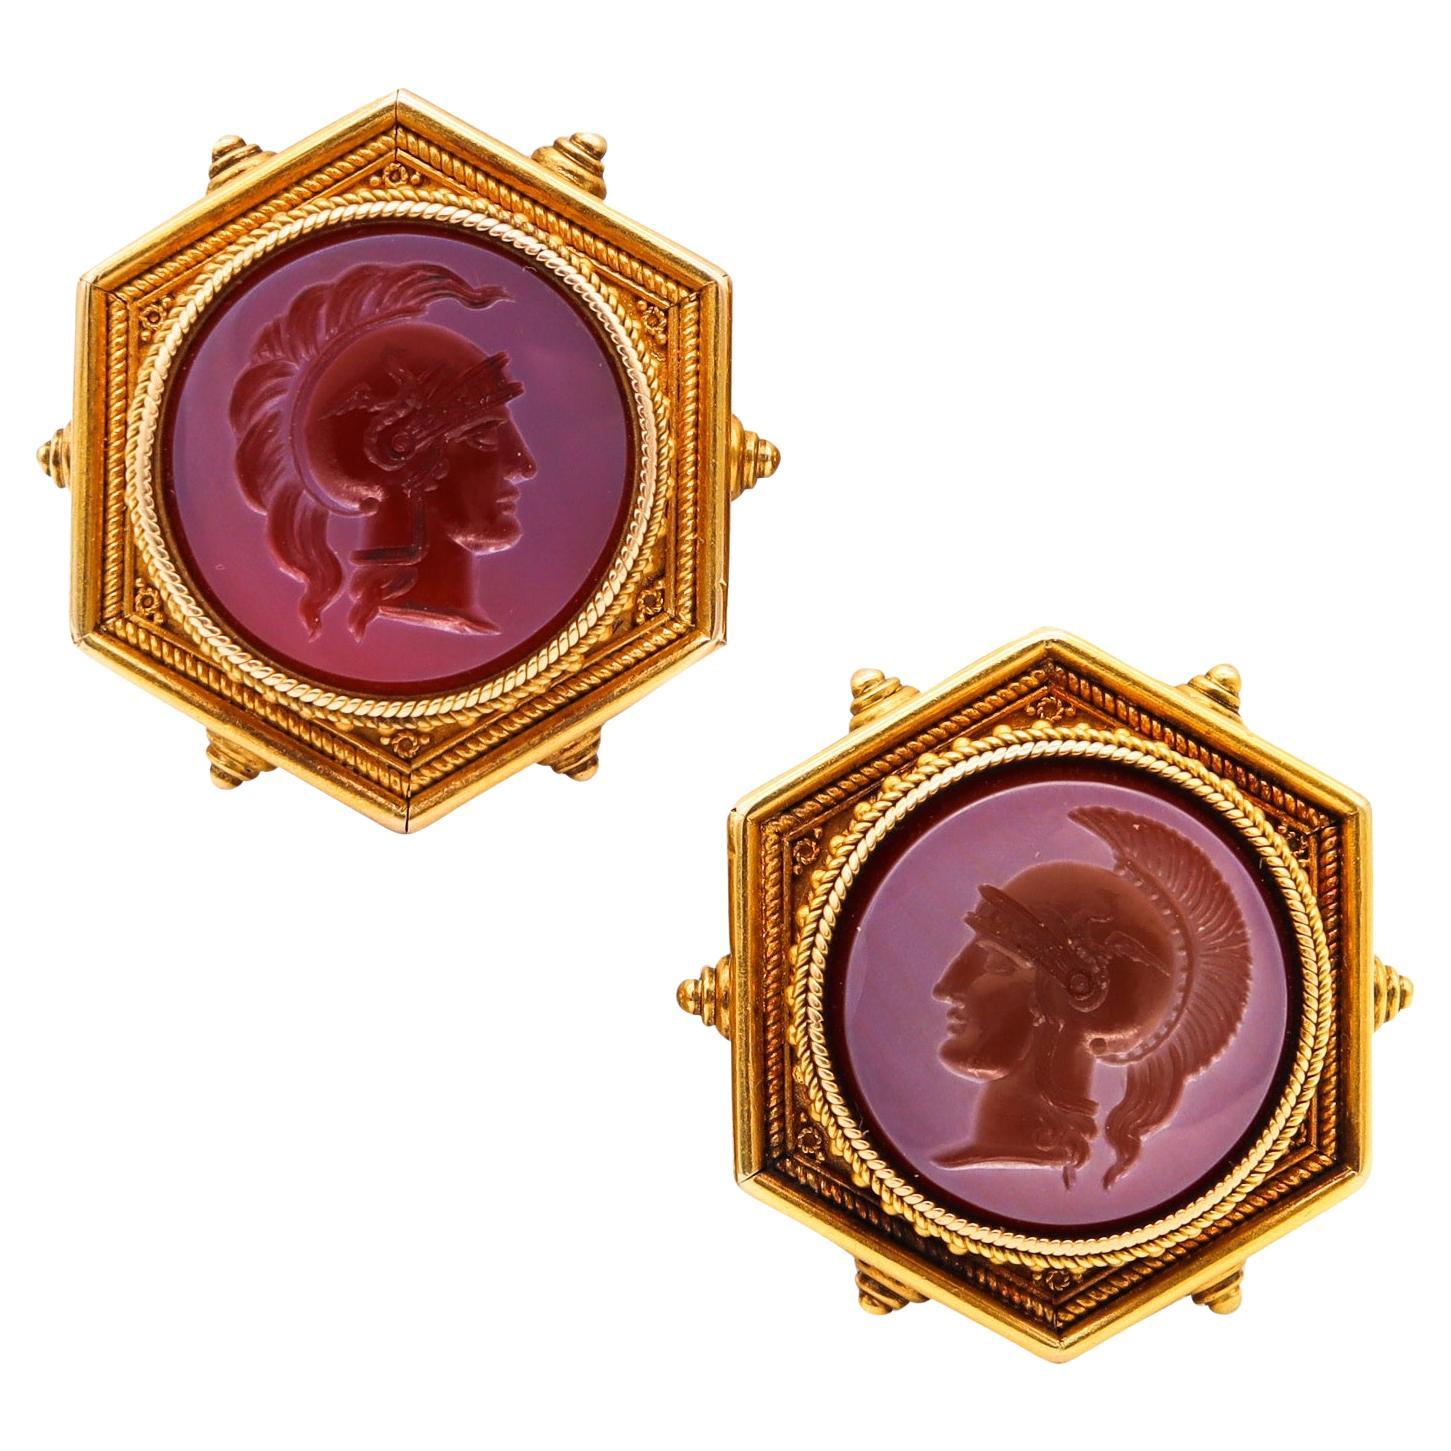 Victorian 1860 Etruscan Revival Earrings 18Kt Gold with Carved Agates Intaglios For Sale